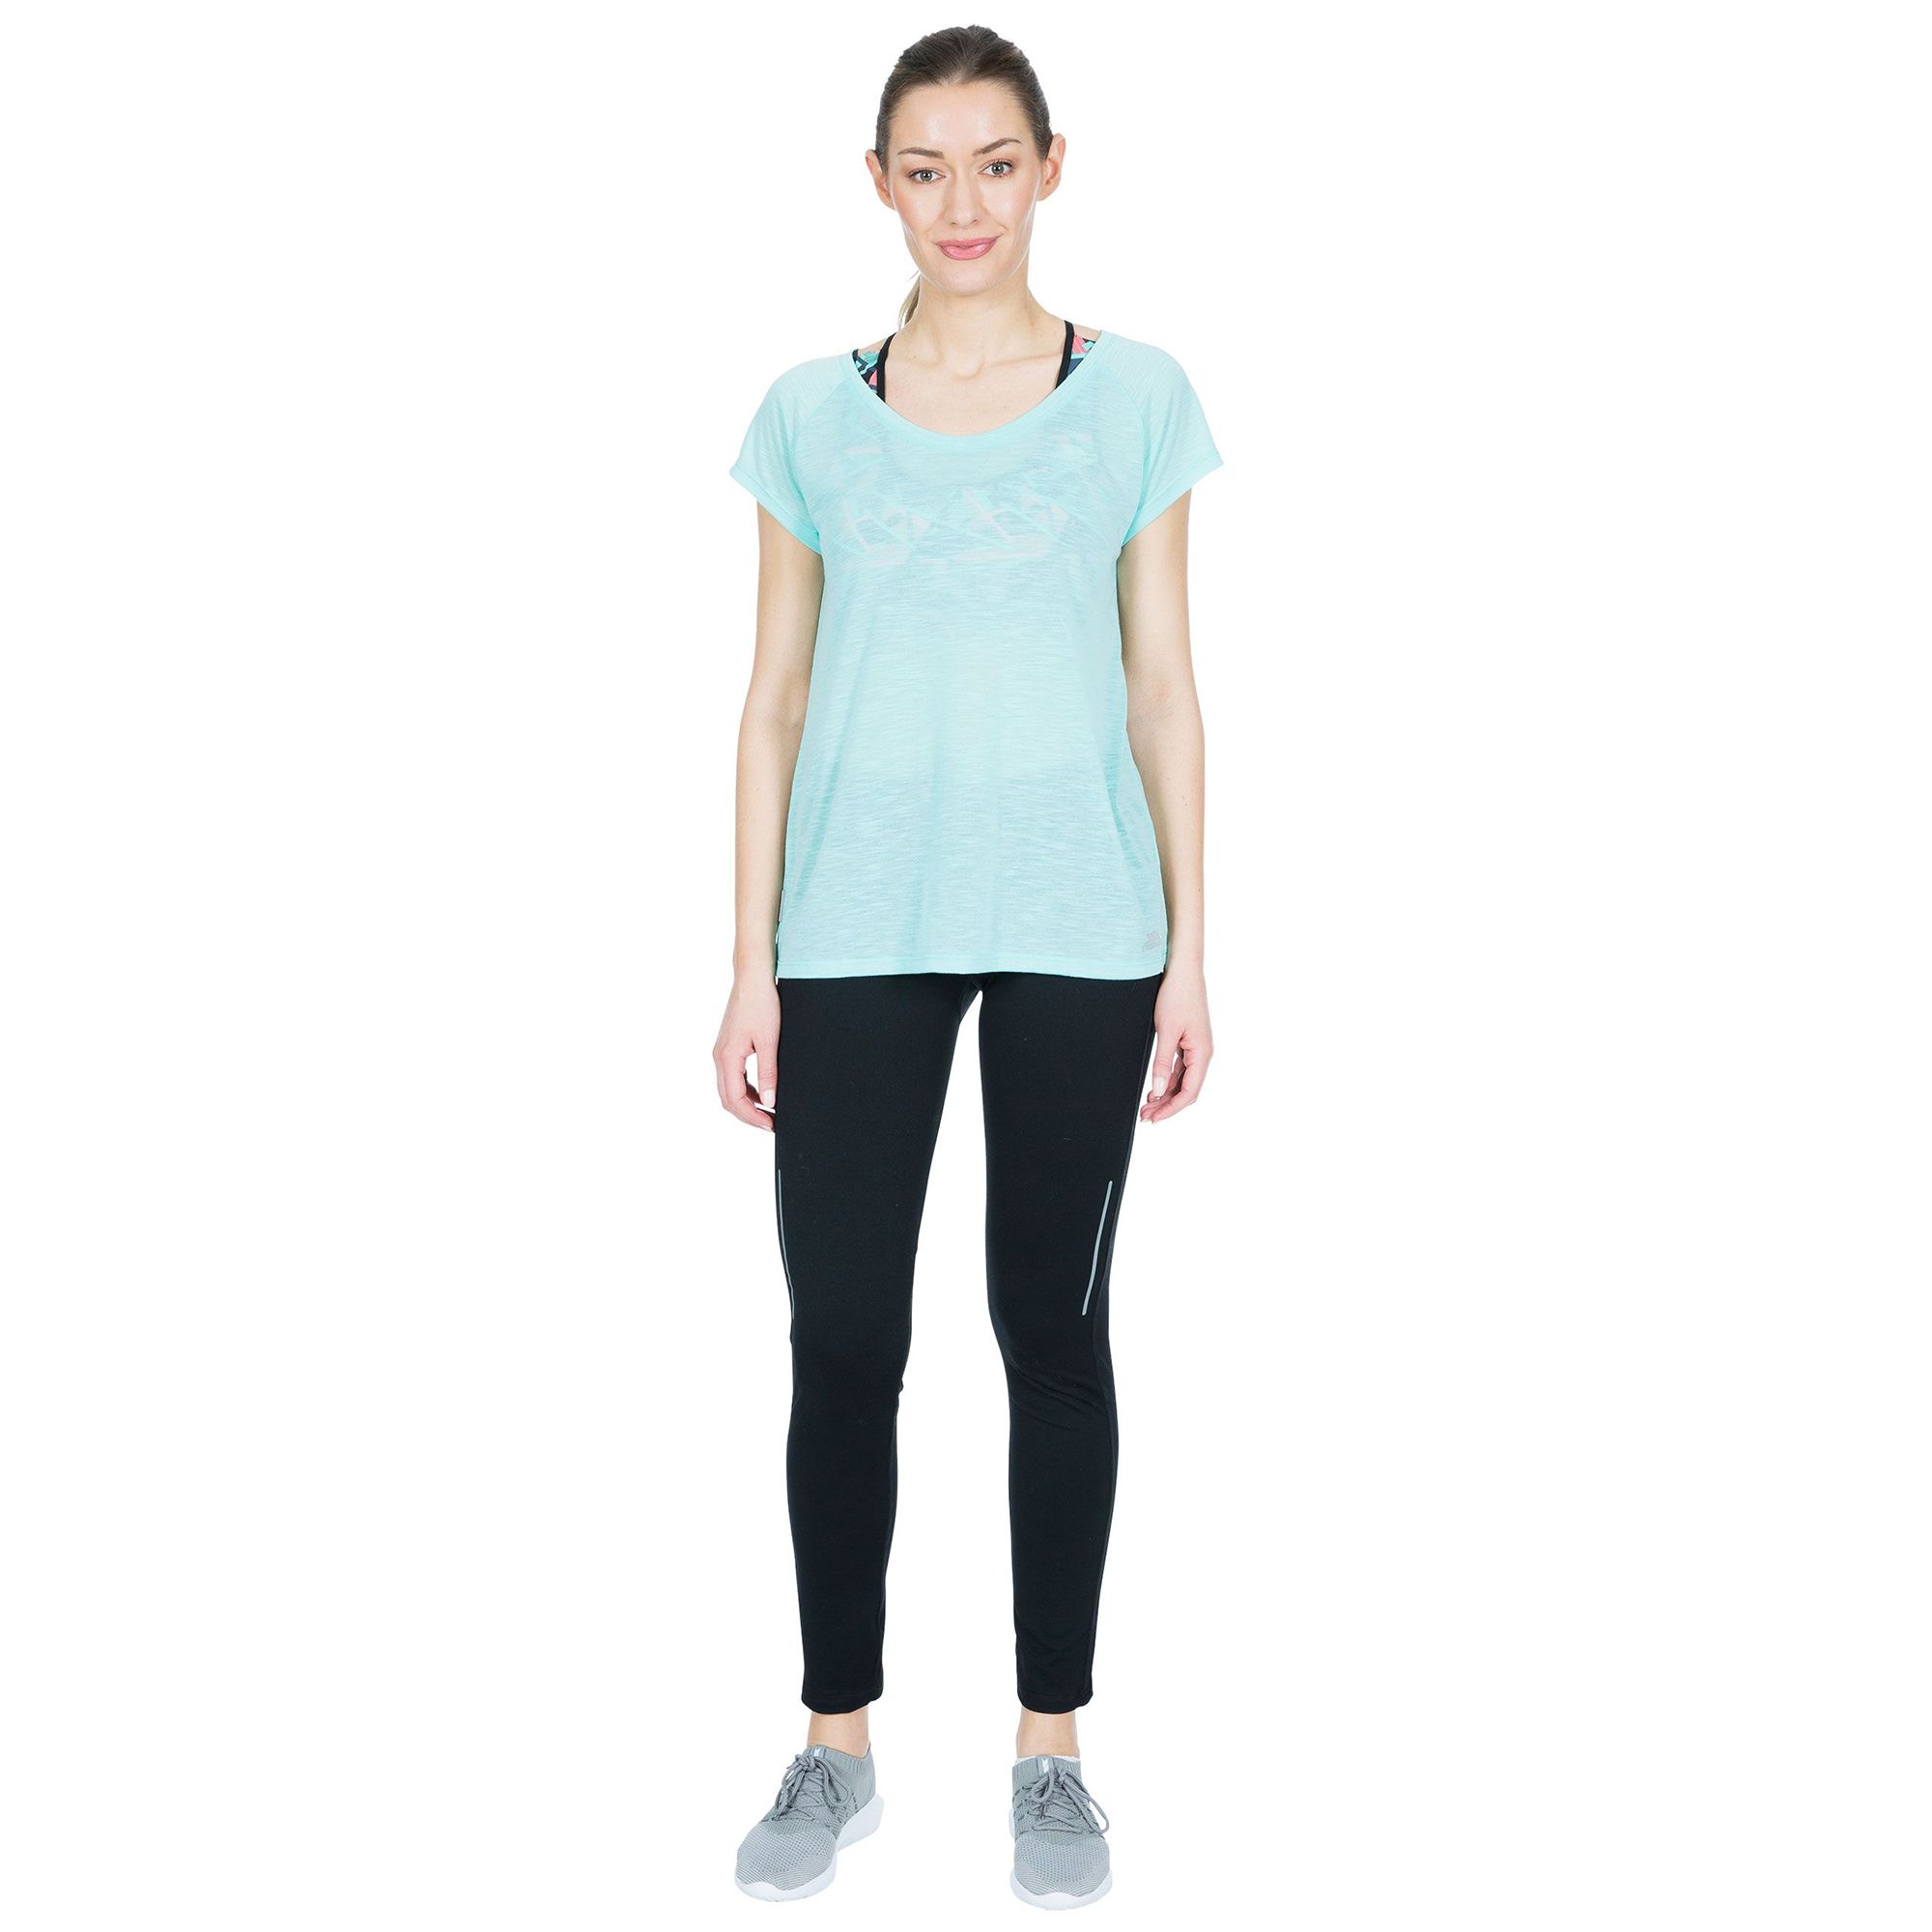 Short sleeve. Scooped neck. Relaxed fit. Contrast inner back neck binding. Reflective printed logos. Quick dry. 100% Polyester. Trespass Womens Chest Sizing (approx): XS/8 - 32in/81cm, S/10 - 34in/86cm, M/12 - 36in/91.4cm, L/14 - 38in/96.5cm, XL/16 - 40in/101.5cm, XXL/18 - 42in/106.5cm.